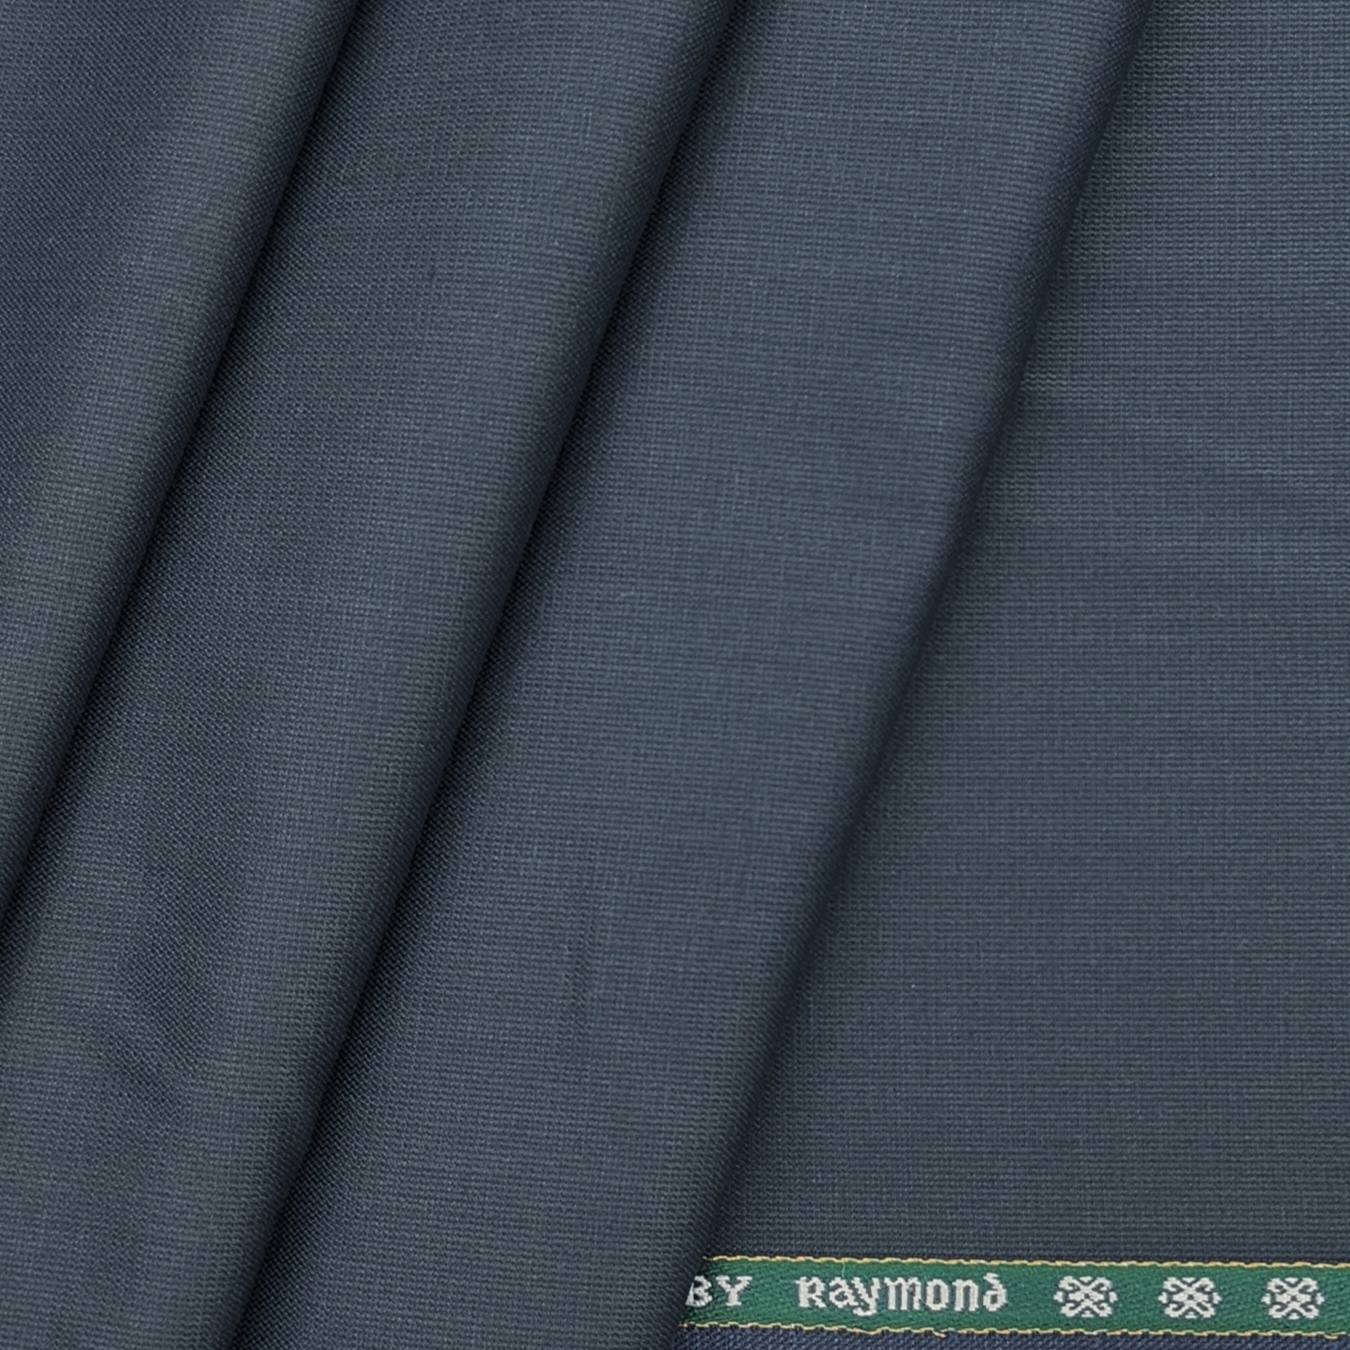 Raymond Trouser Clothing Fabrics Online in India-Seasonsway.com@Cheap,Best,  Rates,Prices,Purchase,Sale for Mens-Boys-Grooms.Explore  Worsted-Wool-Matty-Barathea-Color-Plain-Striped-Wrap Print-Formal-Light  weighted-clothing-Material